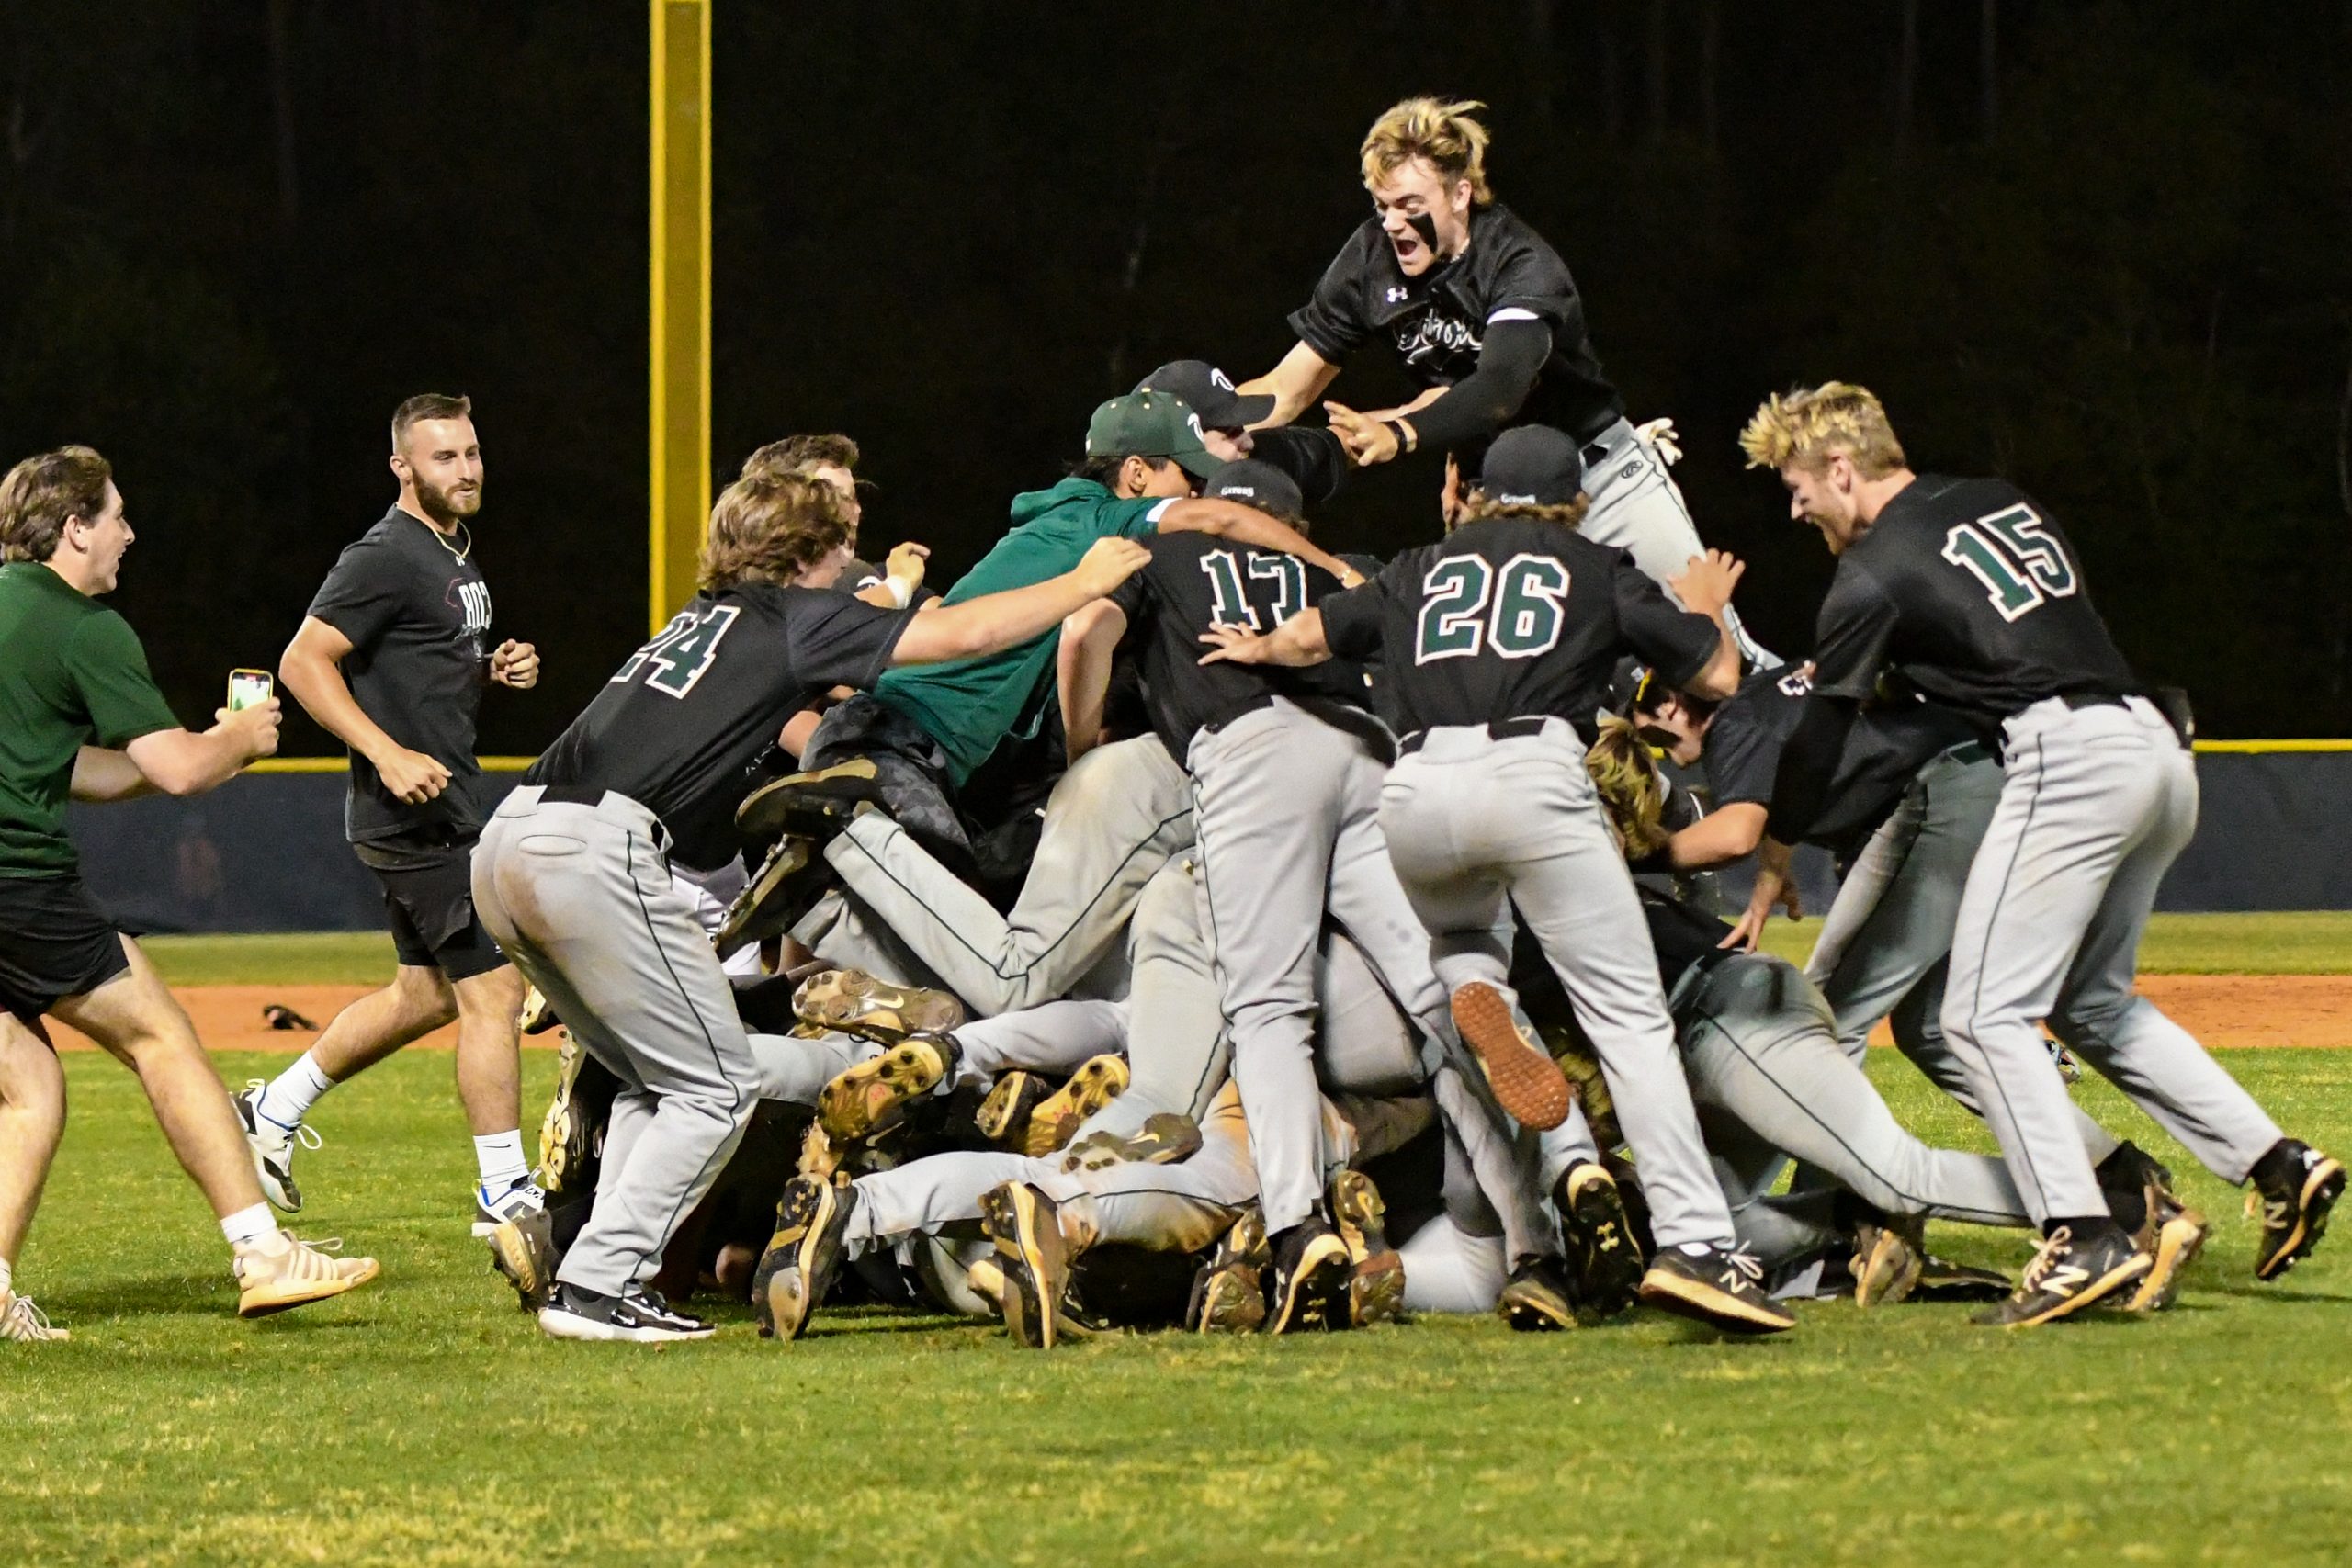 River Bluff baseball capped the 2022-2023 athletic season in the Midlands with a sweep of Blythewood for the Class 5A state championship. The Gators were making their third appearance in the finals in the 10-year history of the school, and this was their first title.